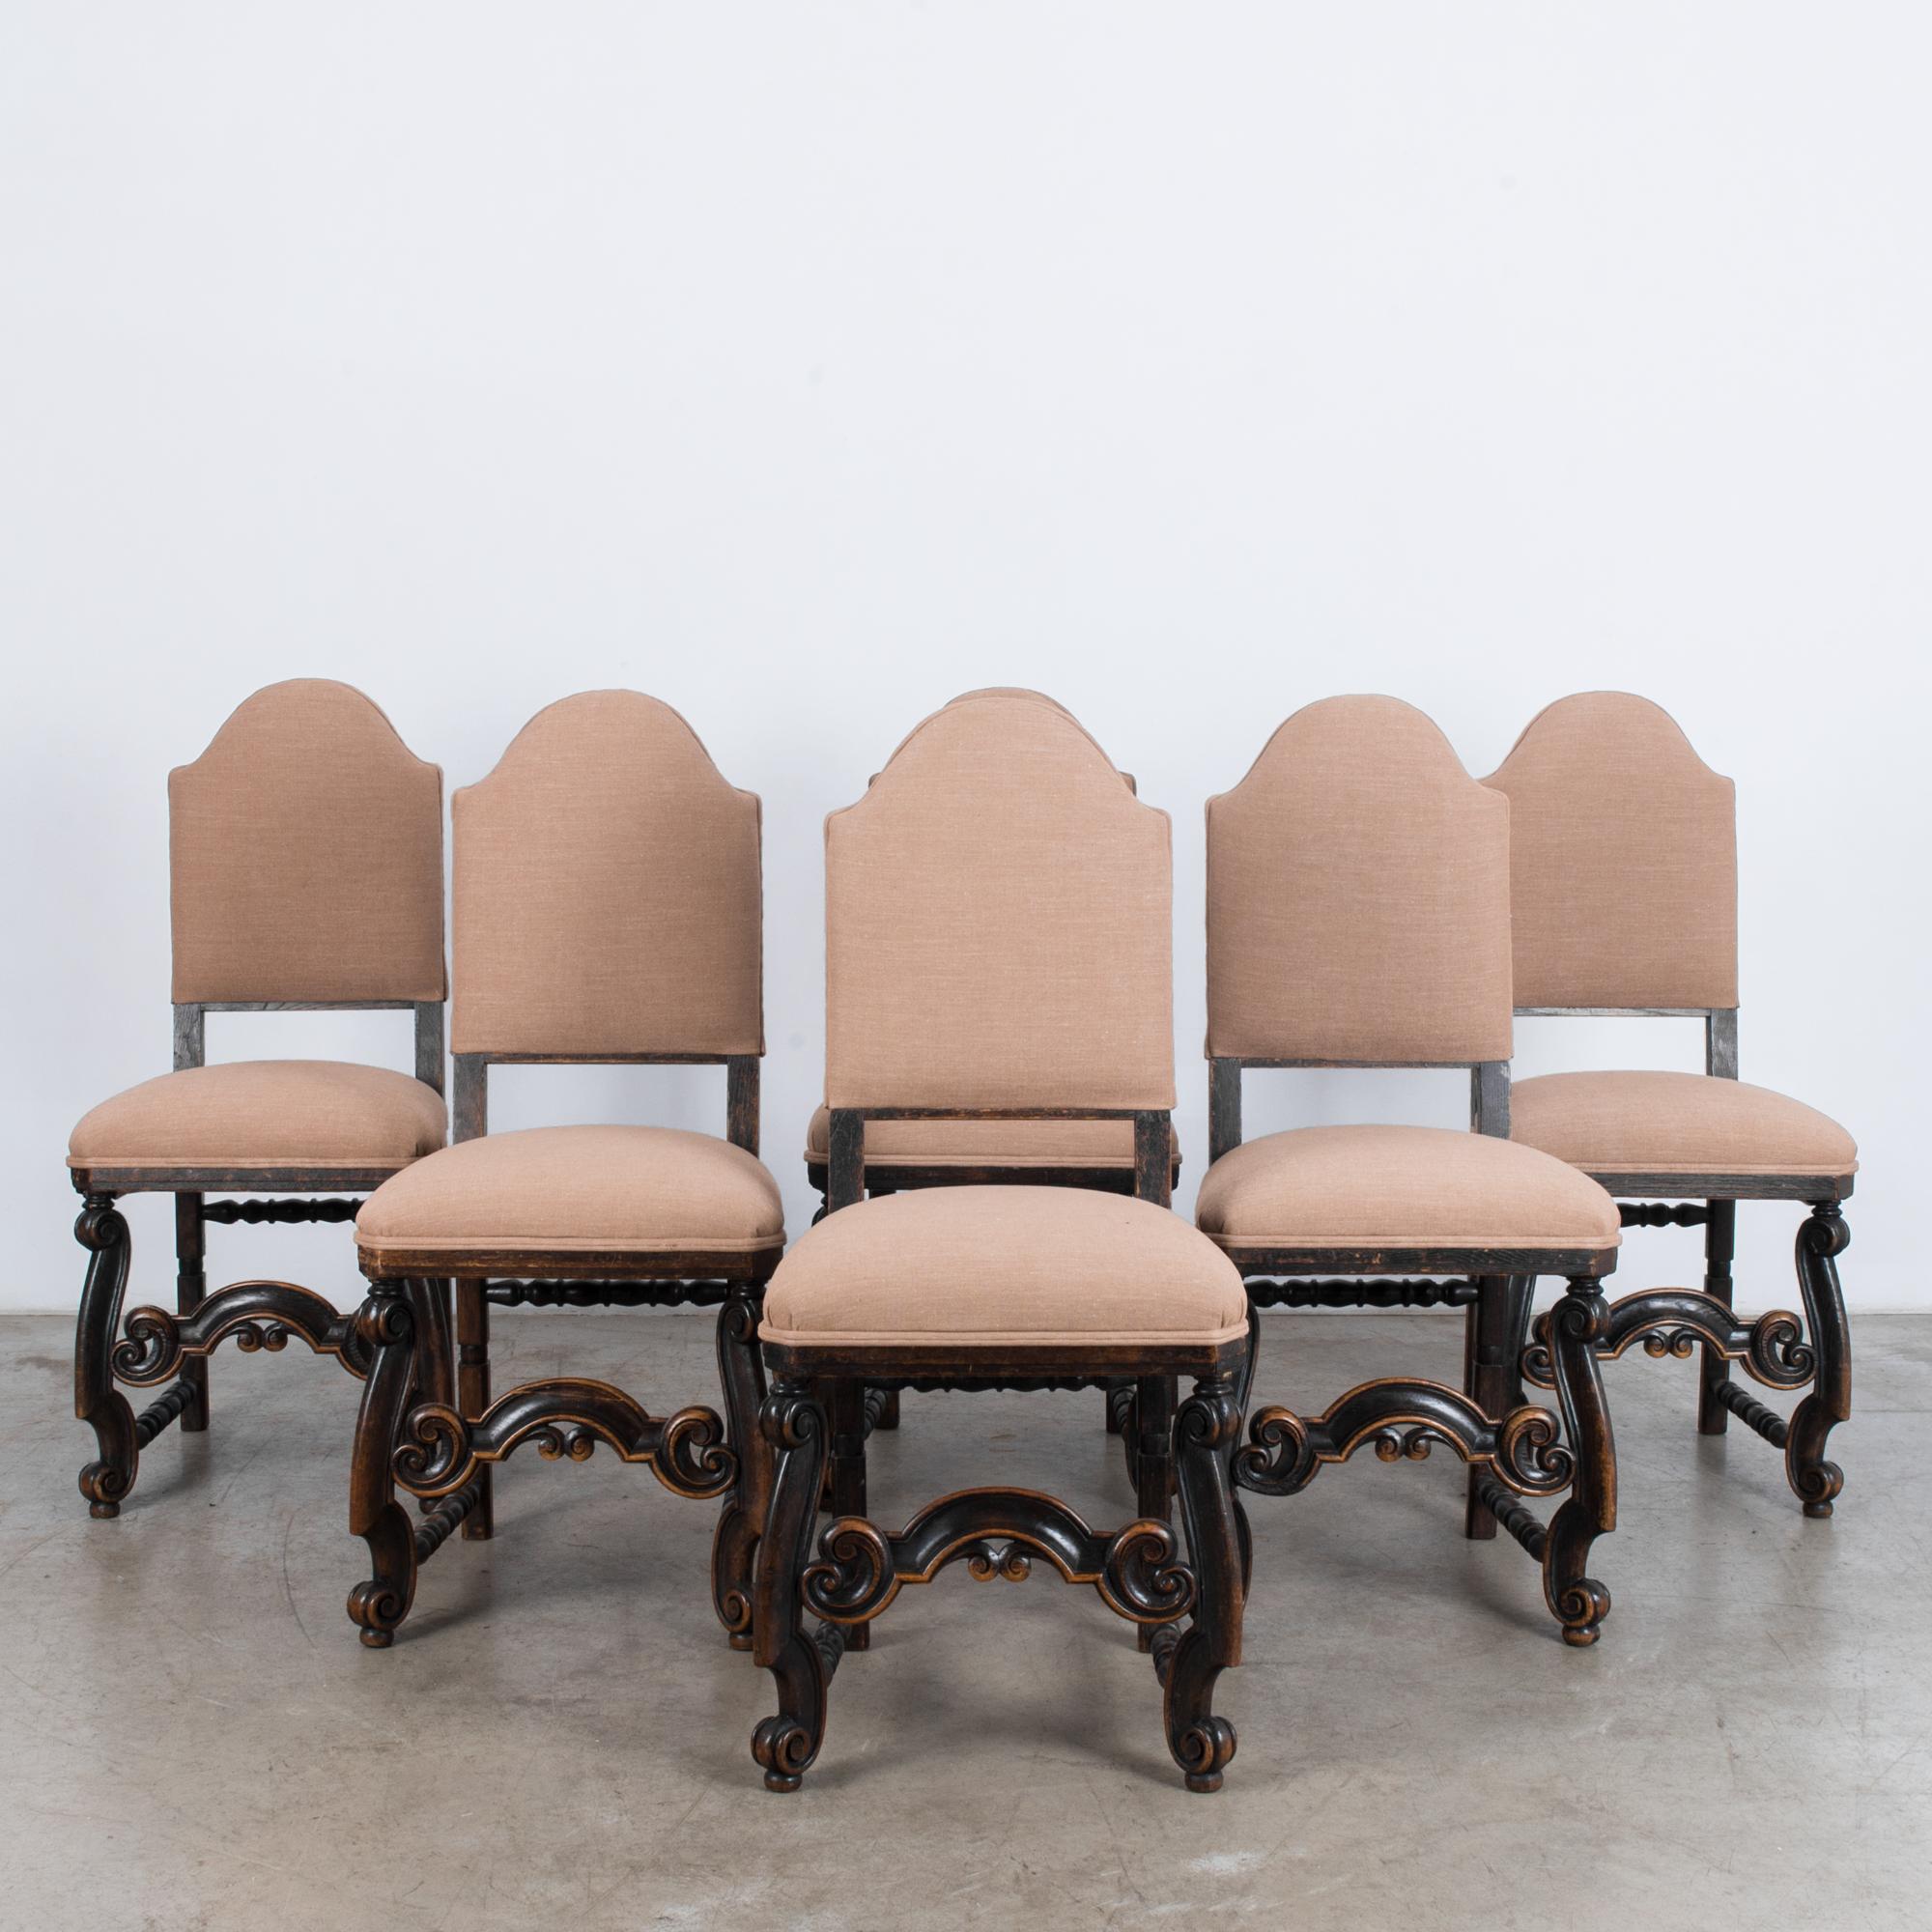 A set of six wooden dining chairs from France, circa 1900. A dark, elaborately carved frame supports an upholstered backrest and seat. The rose taupe color of the upholstery lends a soft, intimate touch to the Baroque scroll-work of the frame,